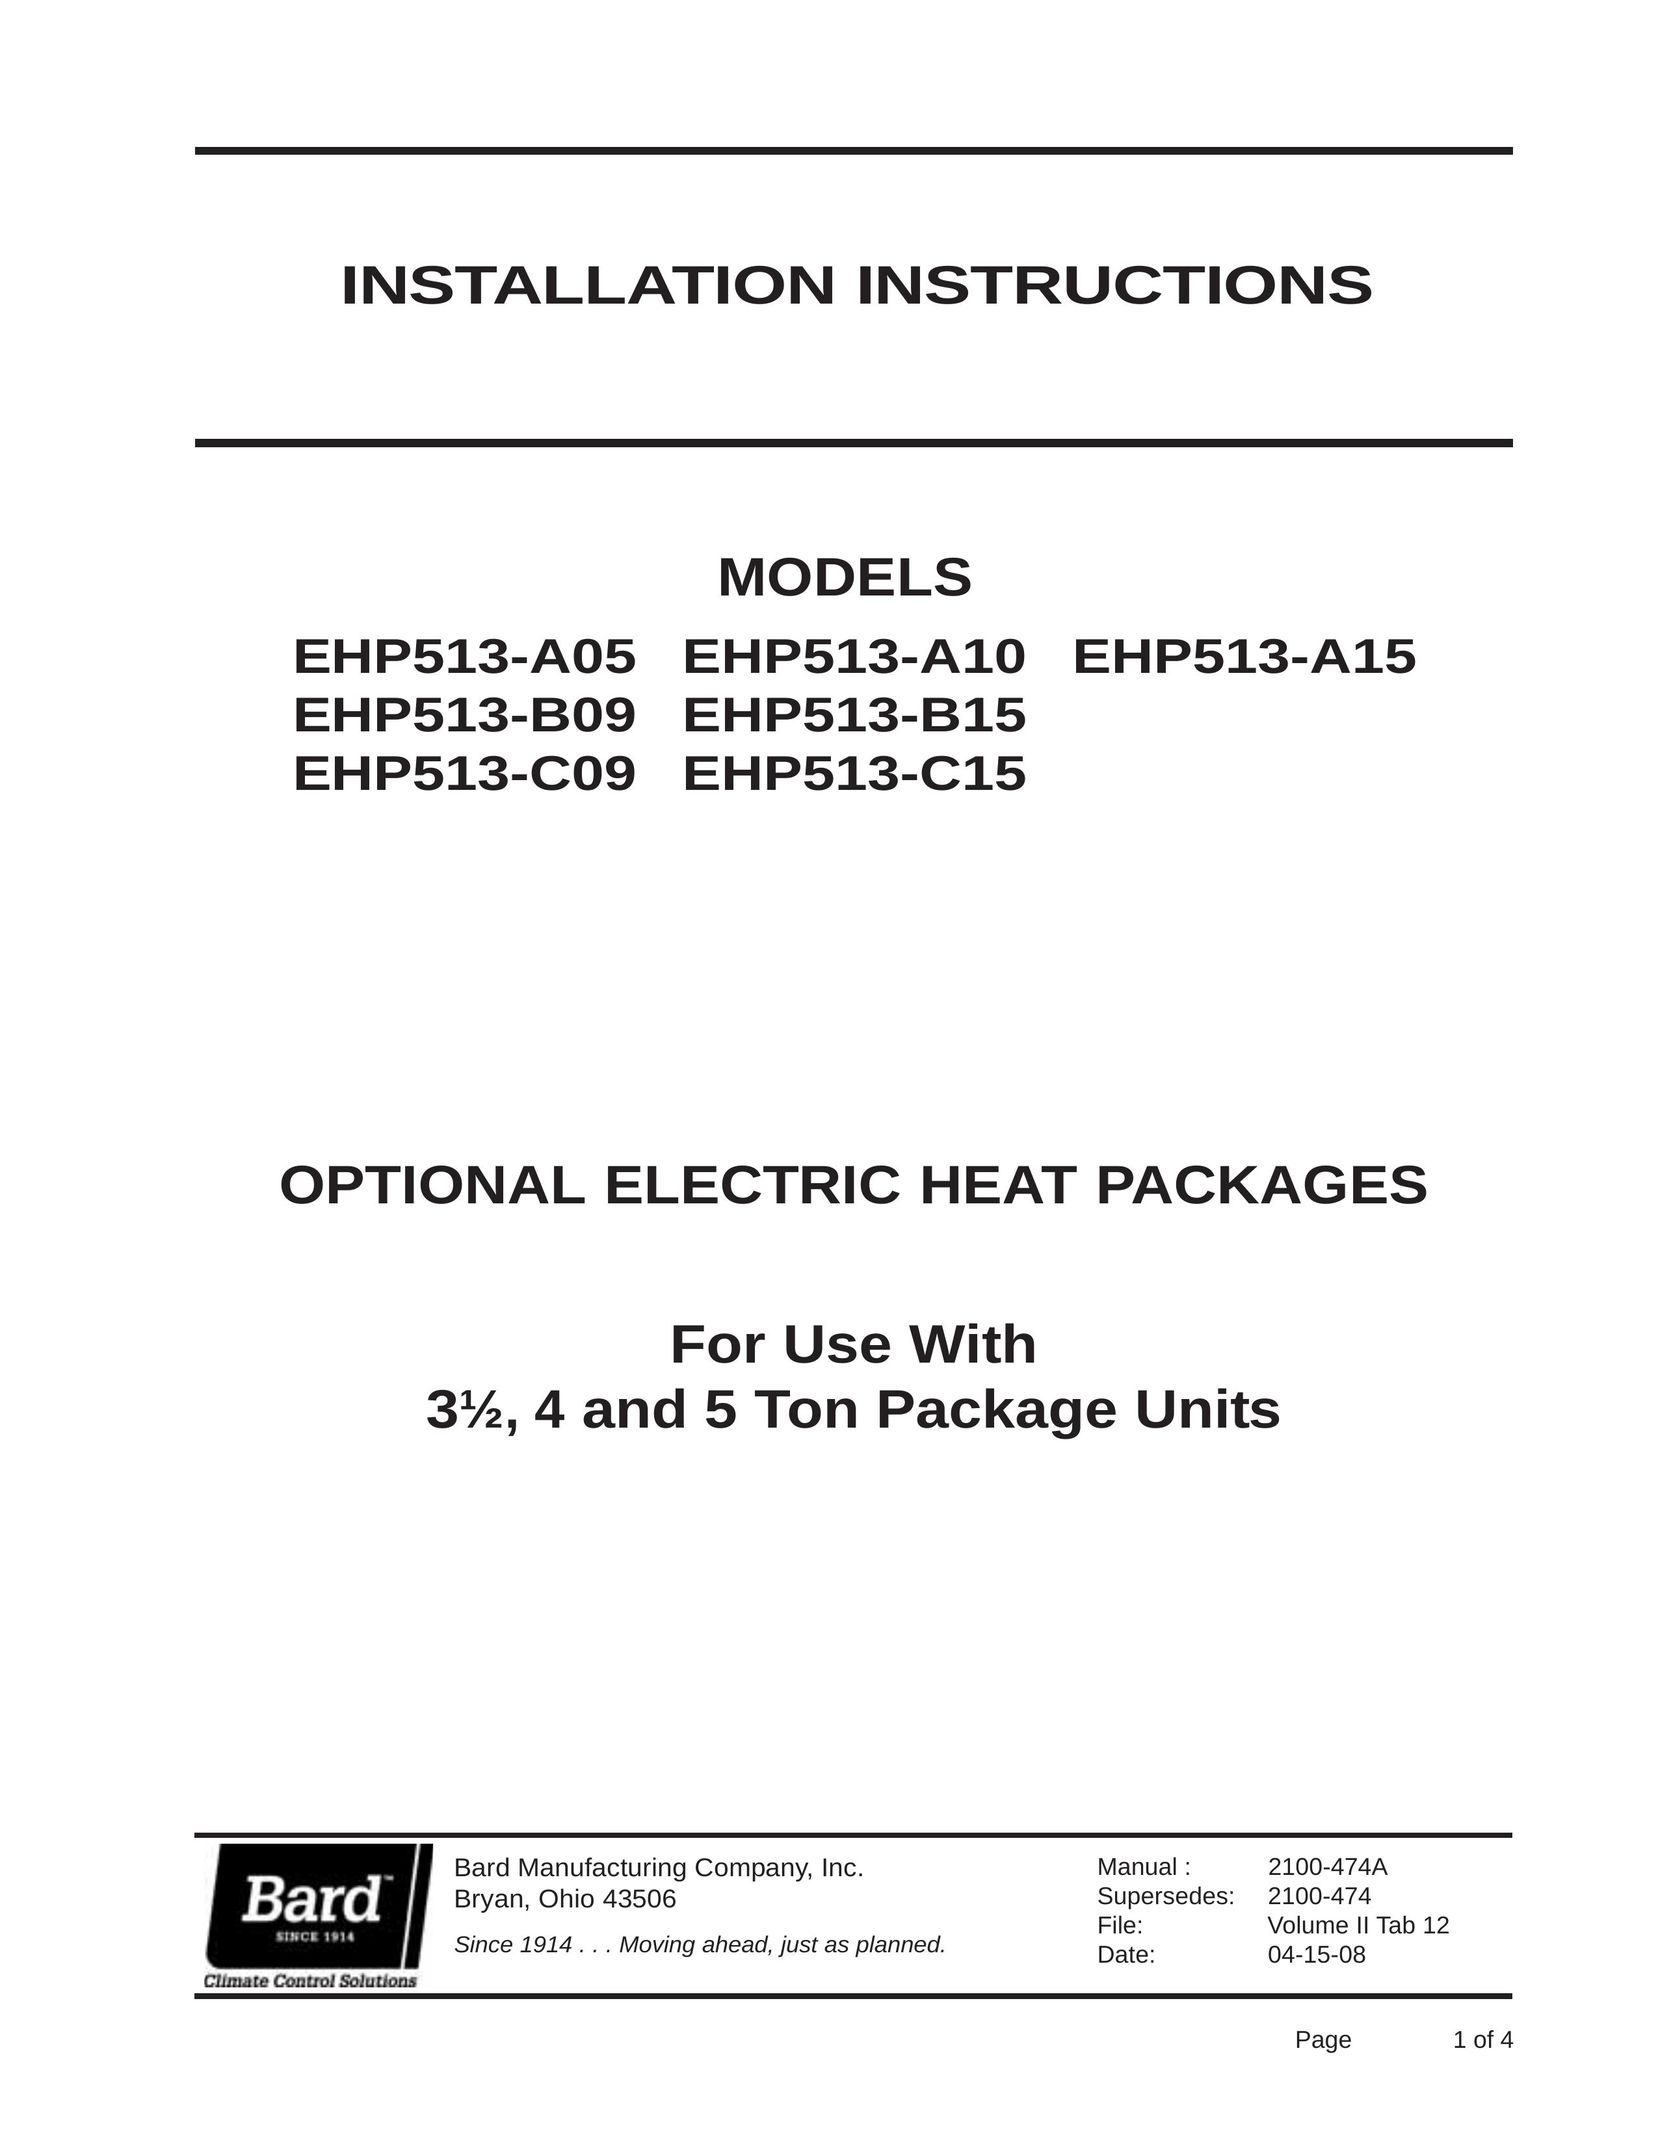 Bard EHP513-A10 Heating System User Manual